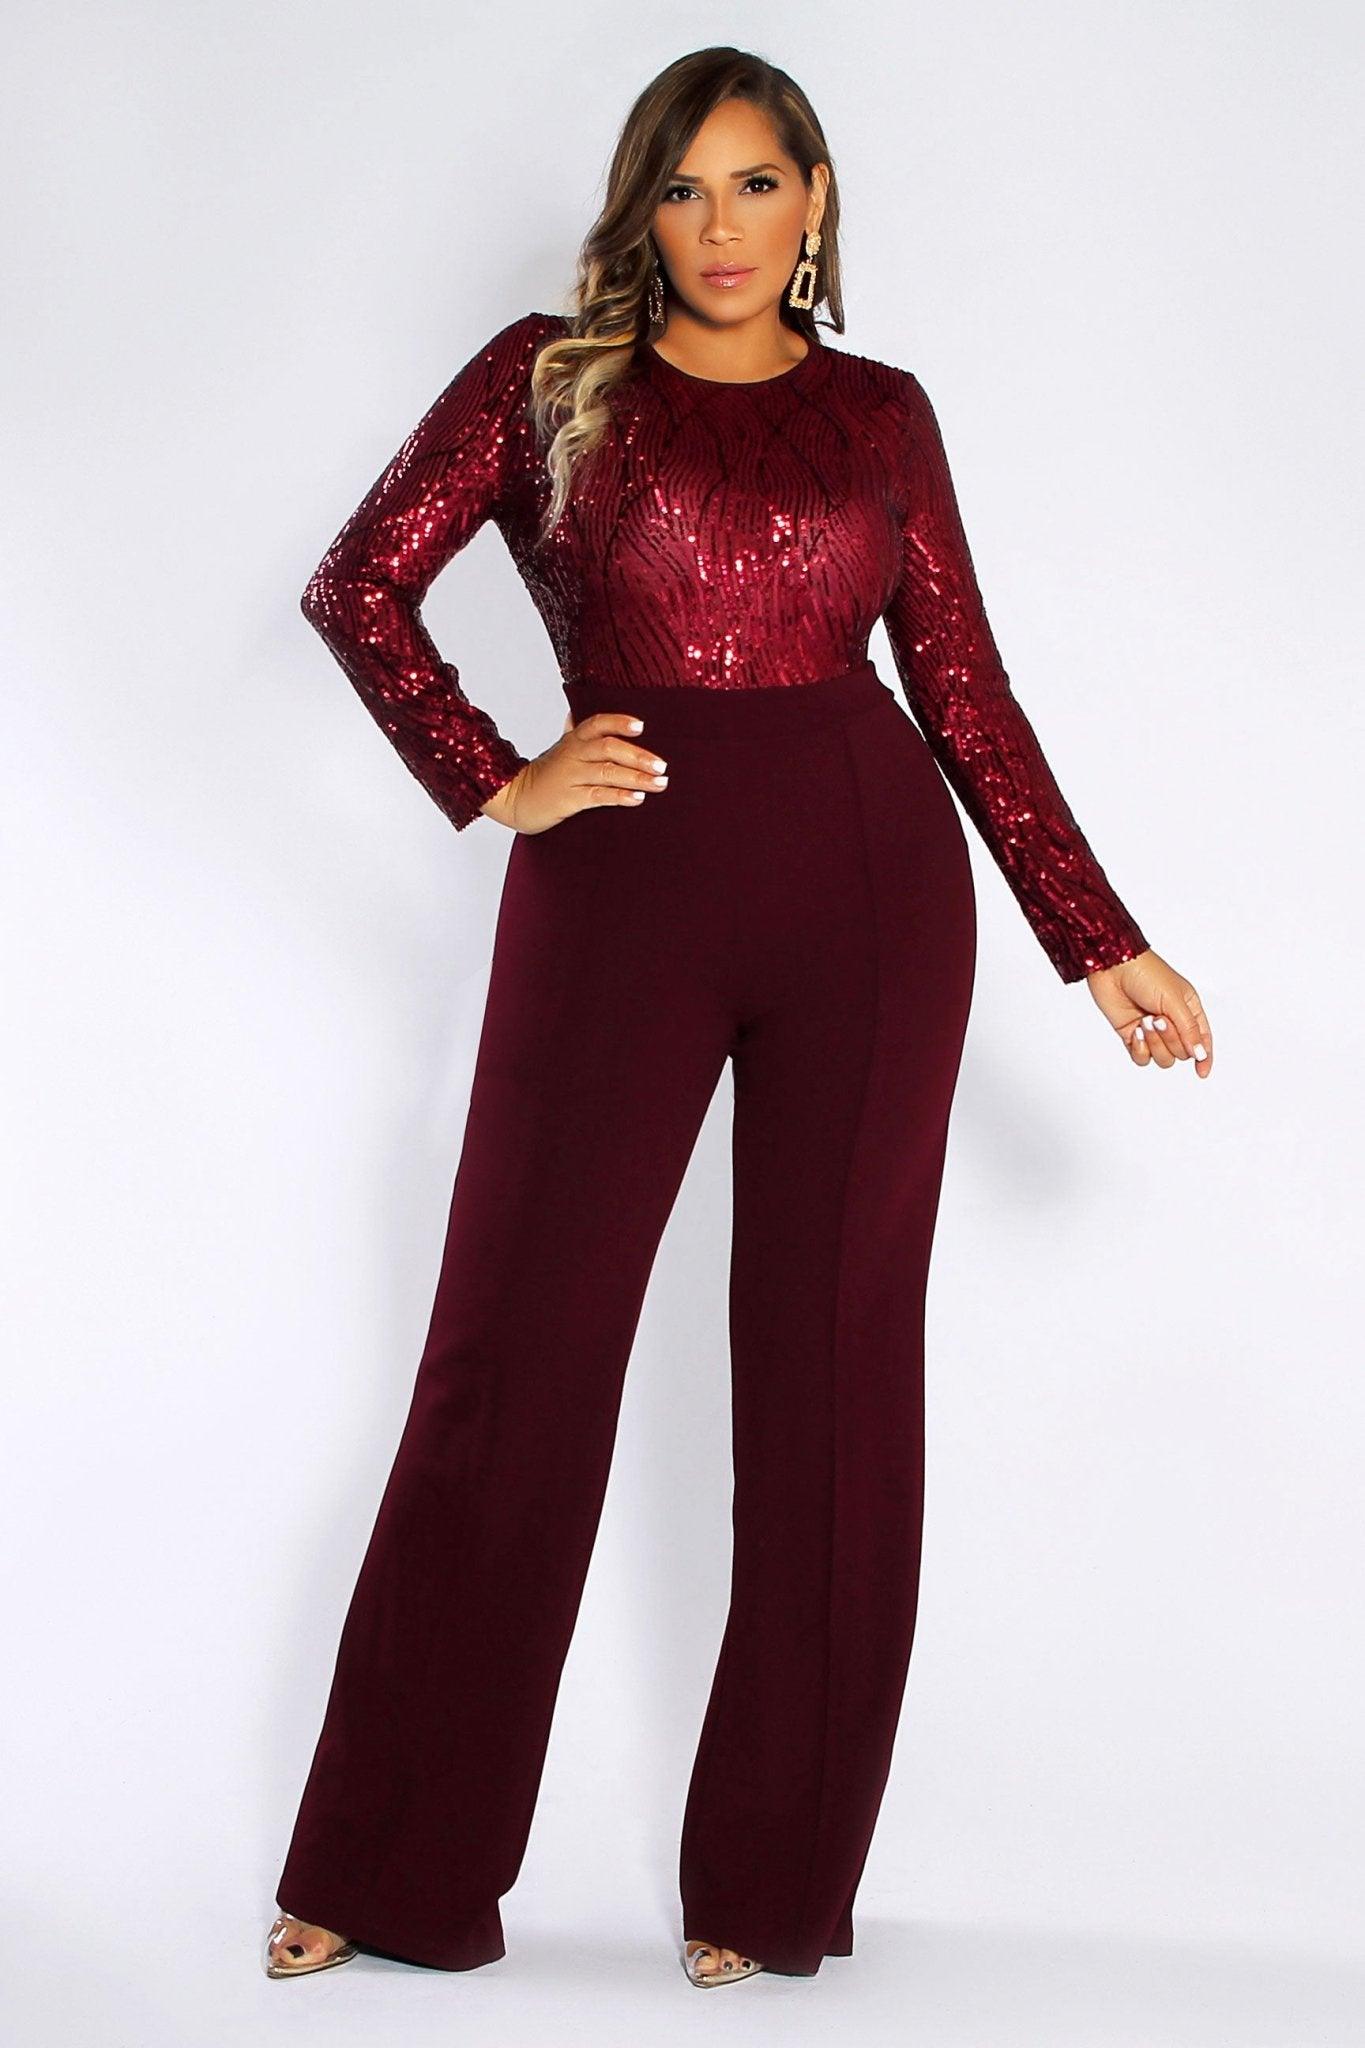 Ellison Gala Sequined Jumpsuit - MY SEXY STYLES